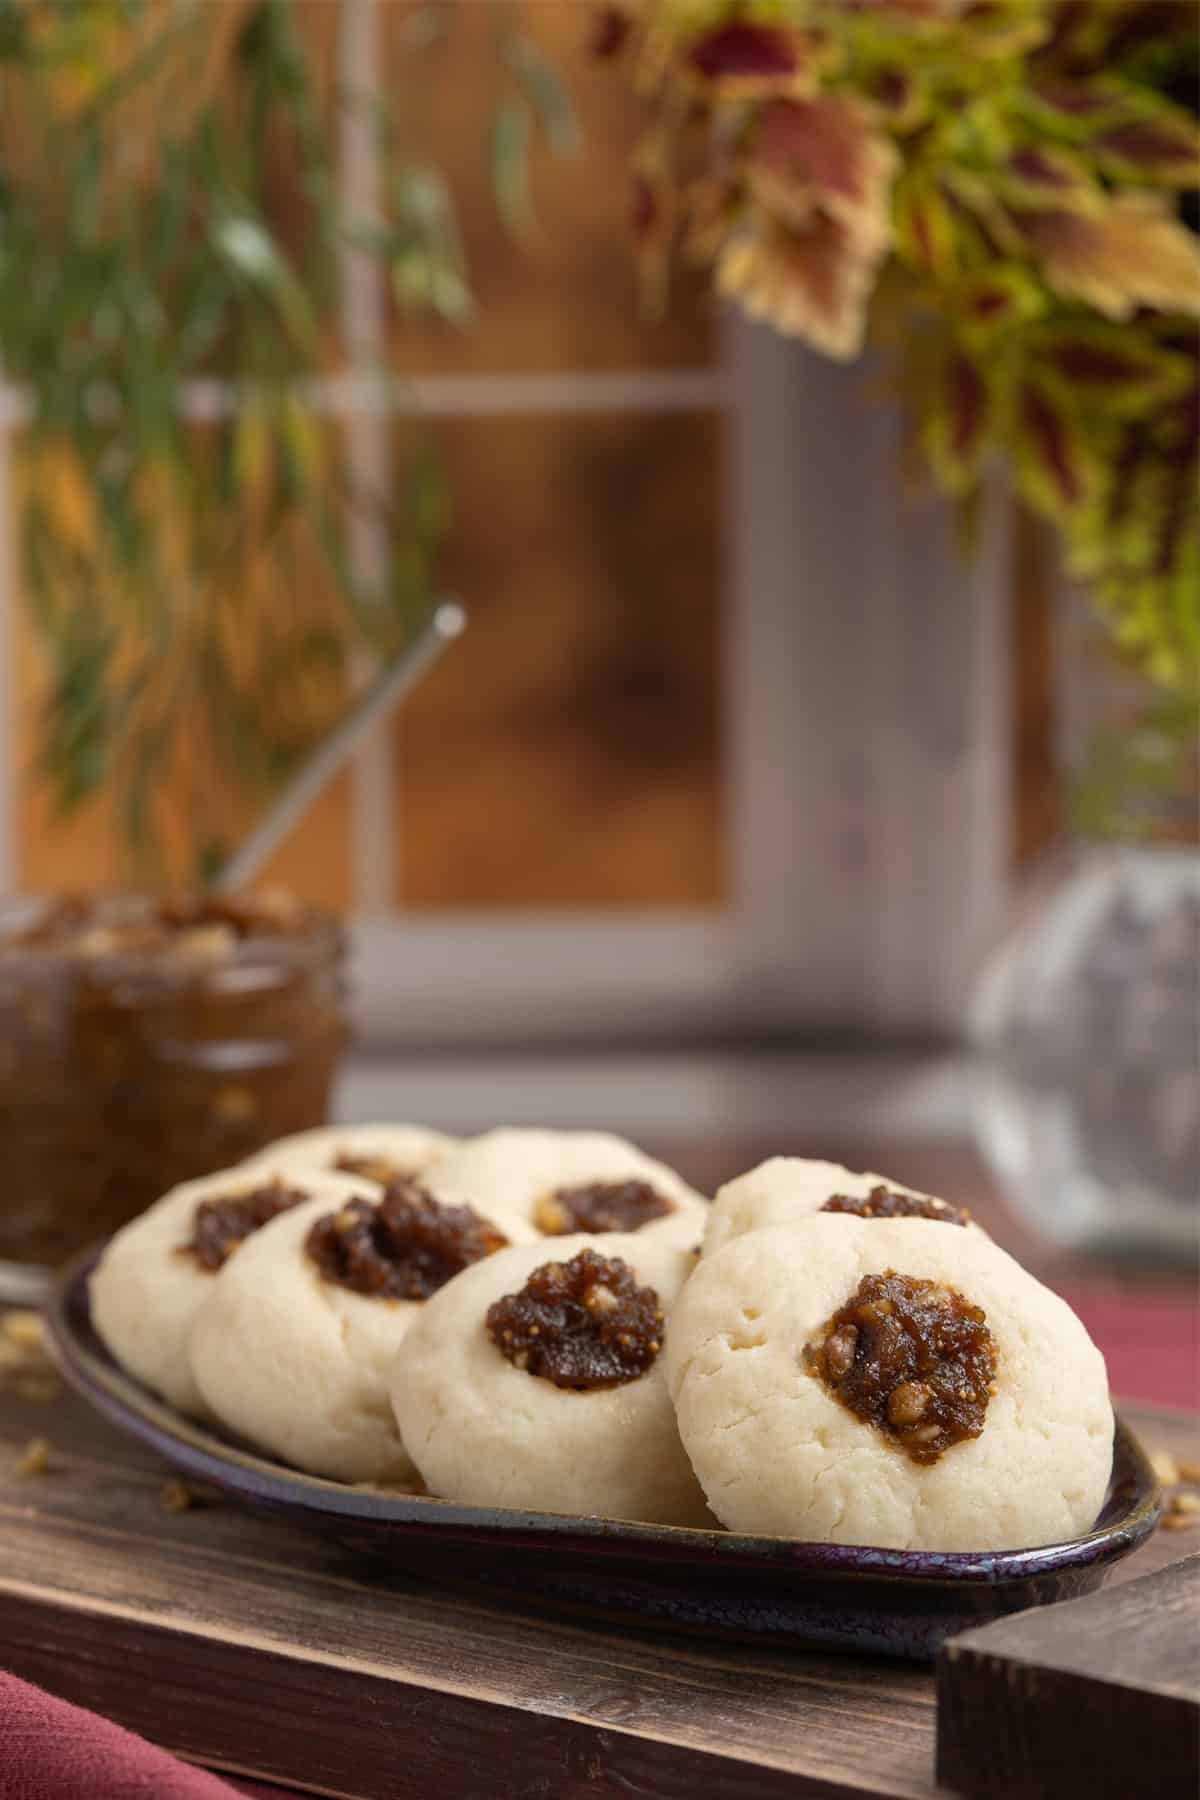 Orange fig thumbprint cookies on an oval dish sitting on a wooden plank in front of a window.